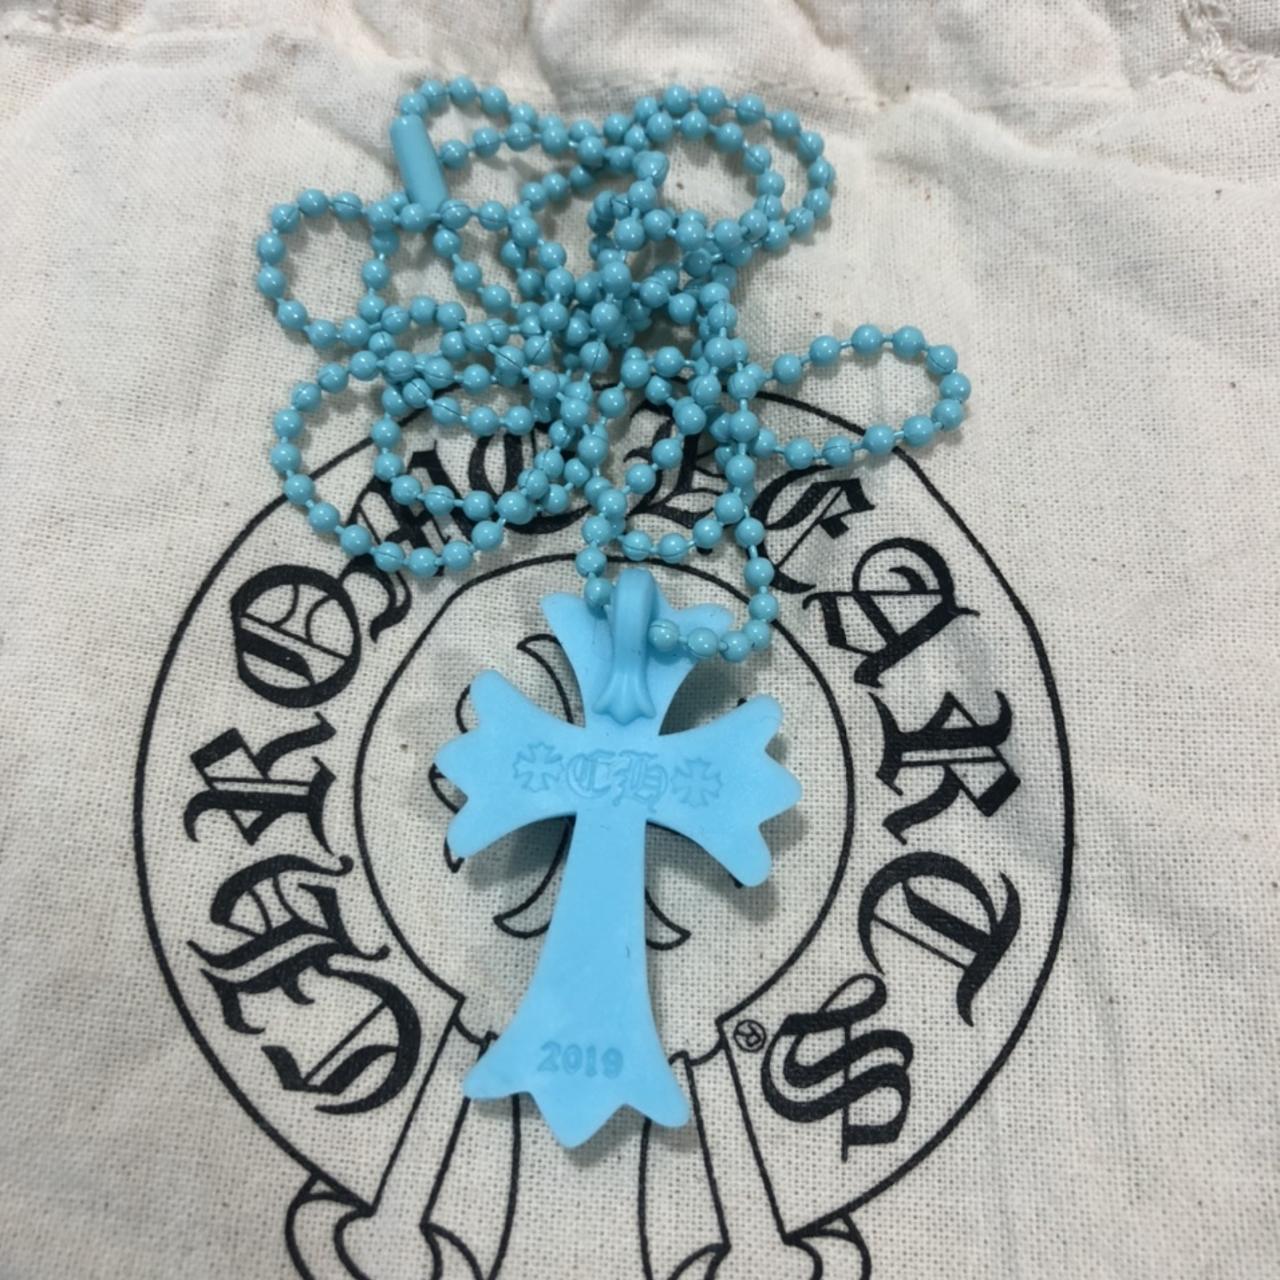 Chrome Hearts 20th Anniversary Silicone Cross Necklace from Tokyo flagship  store opening exclusive / New Silichrome drop. In black color way. Is this  real? Worried about font of engravings and bag it